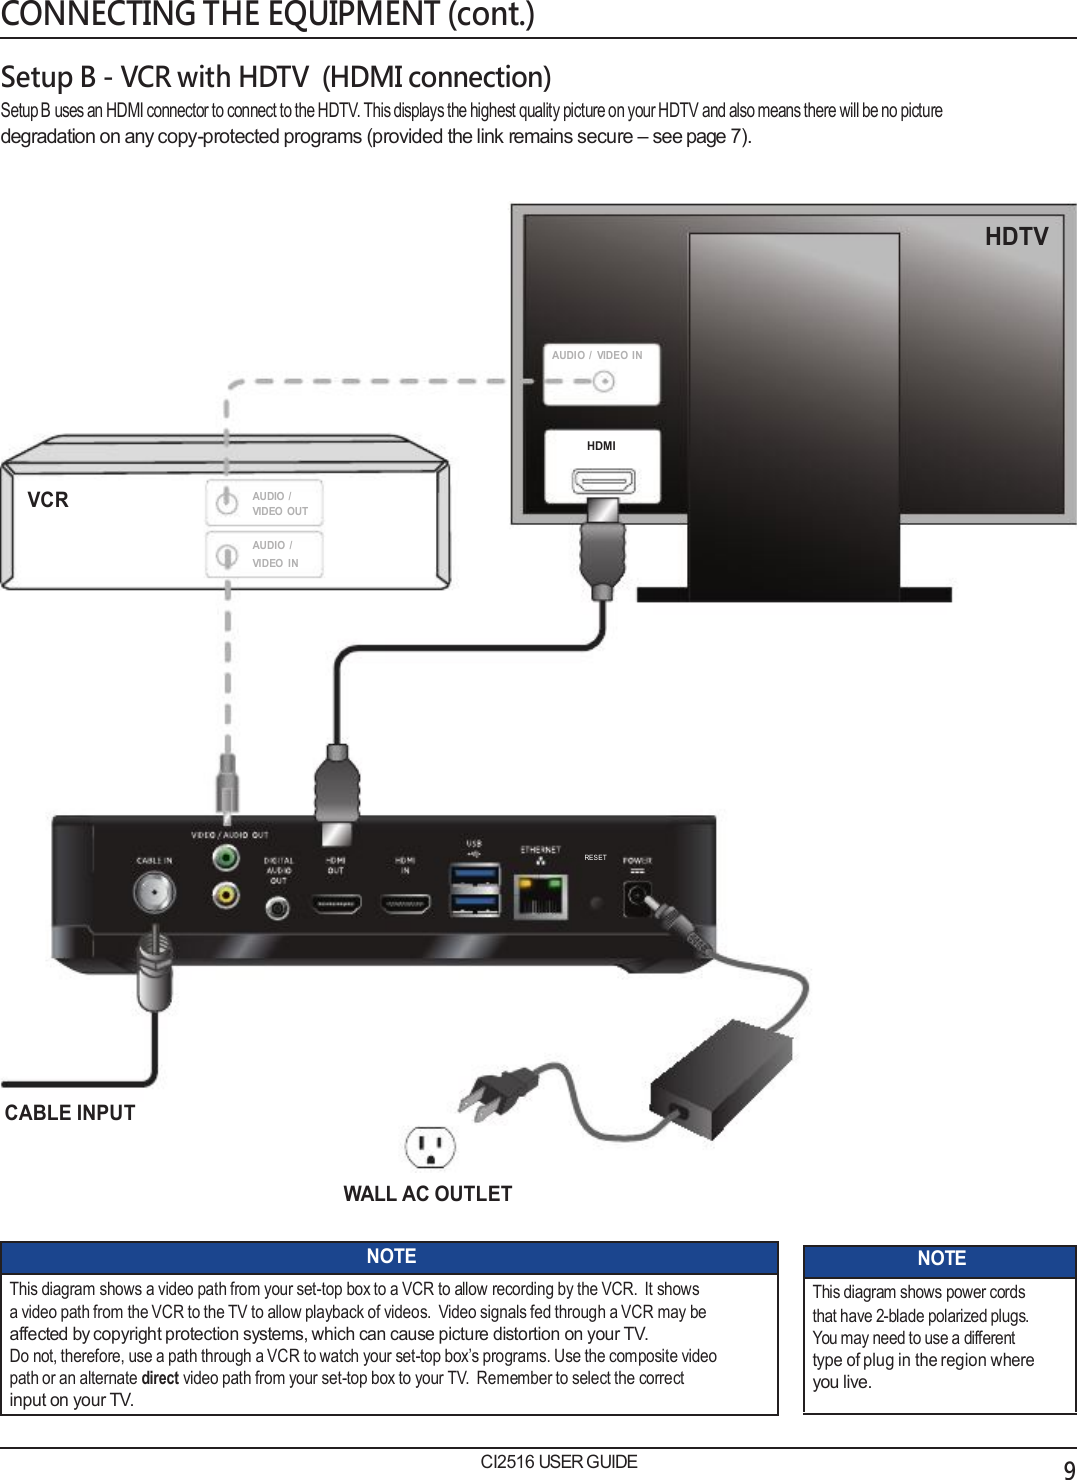   CONNECTING THE EQUIPMENT (cont.)  Setup B - VCR with HDTV  (HDMI connection) Setup B uses an HDMI connector to connect to the HDTV. This displays the highest quality picture on your HDTV and also means there will be no picture degradation on any copy-protected programs (provided the link remains secure – see page 7).   HDTV    AUDIO  /  VIDEO  IN   HDMI  VCR  AUDIO  / VIDEO  OUT AUDIO  / VIDEO  IN            RESET          CABLE INPUT  WALL AC OUTLET  NOTE This diagram shows a video path from your set-top box to a VCR to allow recording by the VCR.  It shows a video path from the VCR to the TV to allow playback of videos.  Video signals fed through a VCR may be affected by copyright protection systems, which can cause picture distortion on your TV. Do not, therefore, use a path through a VCR to watch your set-top box’s programs. Use the composite video path or an alternate direct video path from your set-top box to your TV.  Remember to select the correct input on your TV.  CI2516 USER GUIDE NOTE This diagram shows power cords that have 2-blade polarized plugs. You may need to use a different type of plug in the region where you live.           9 